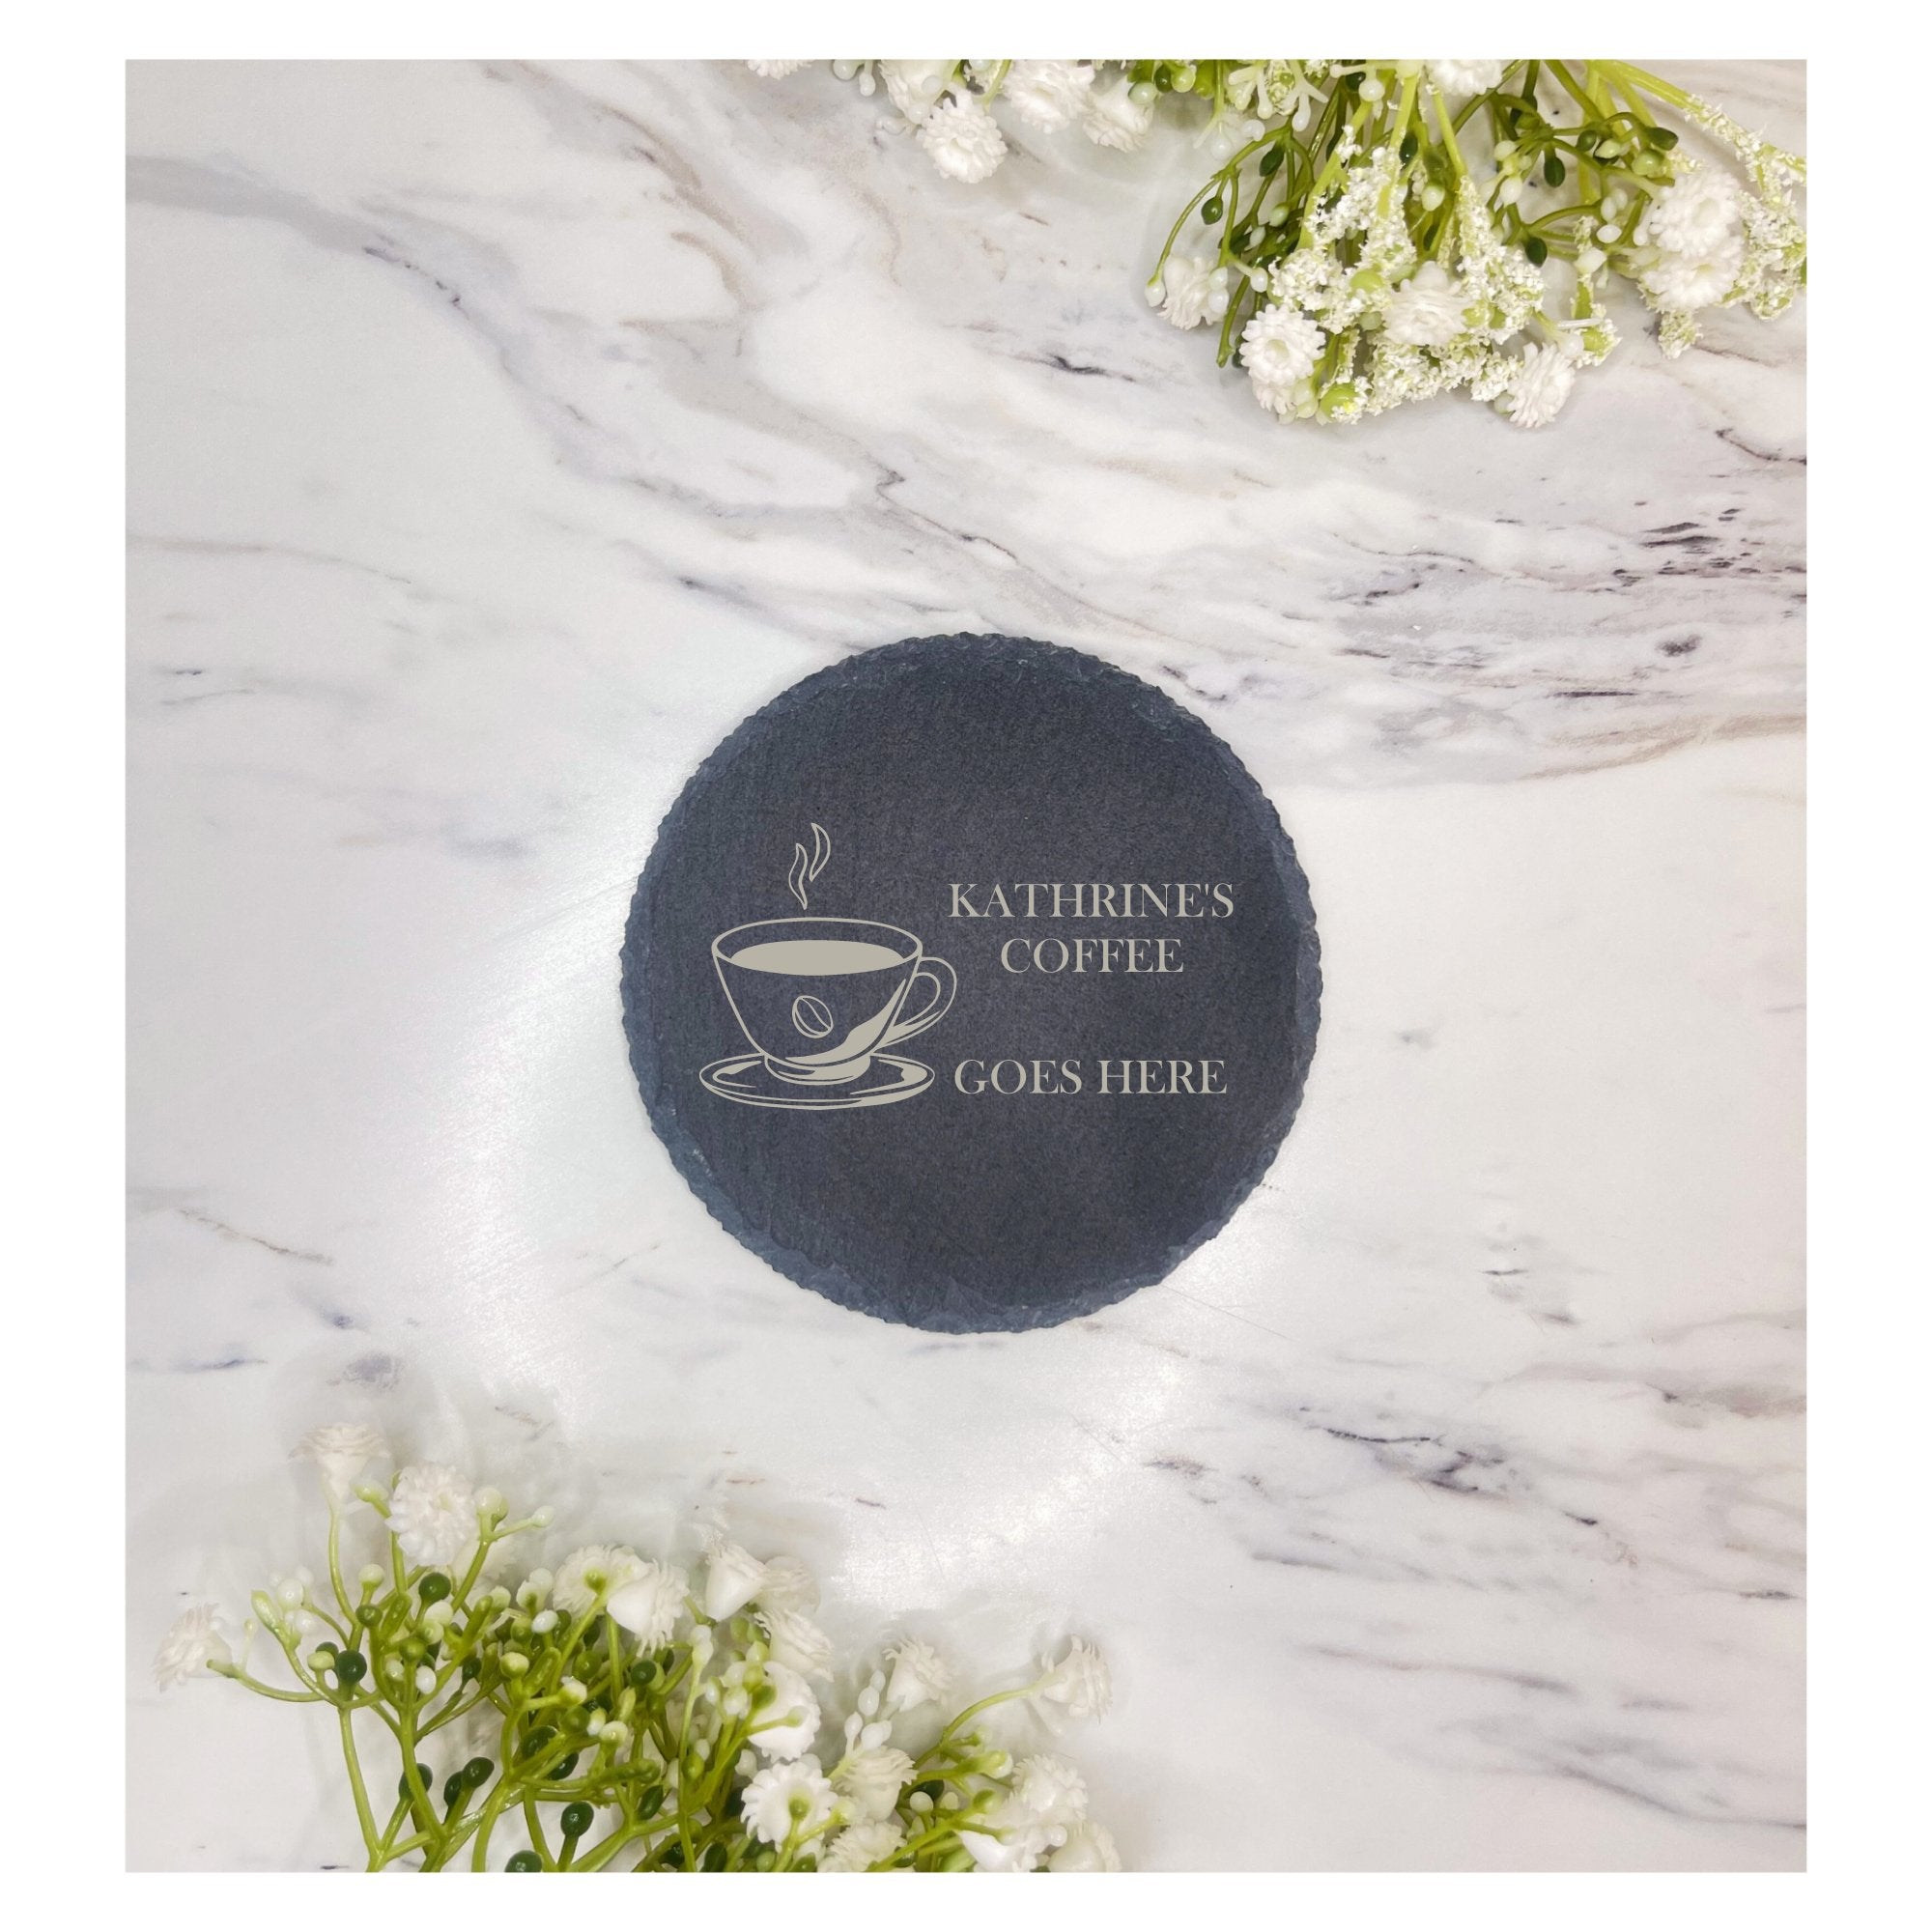 Personalised Coasters Collection: Explore a variety of custom coasters at Rowland Designs. From slate to wood, find the perfect unique and thoughtful gift for any occasion.